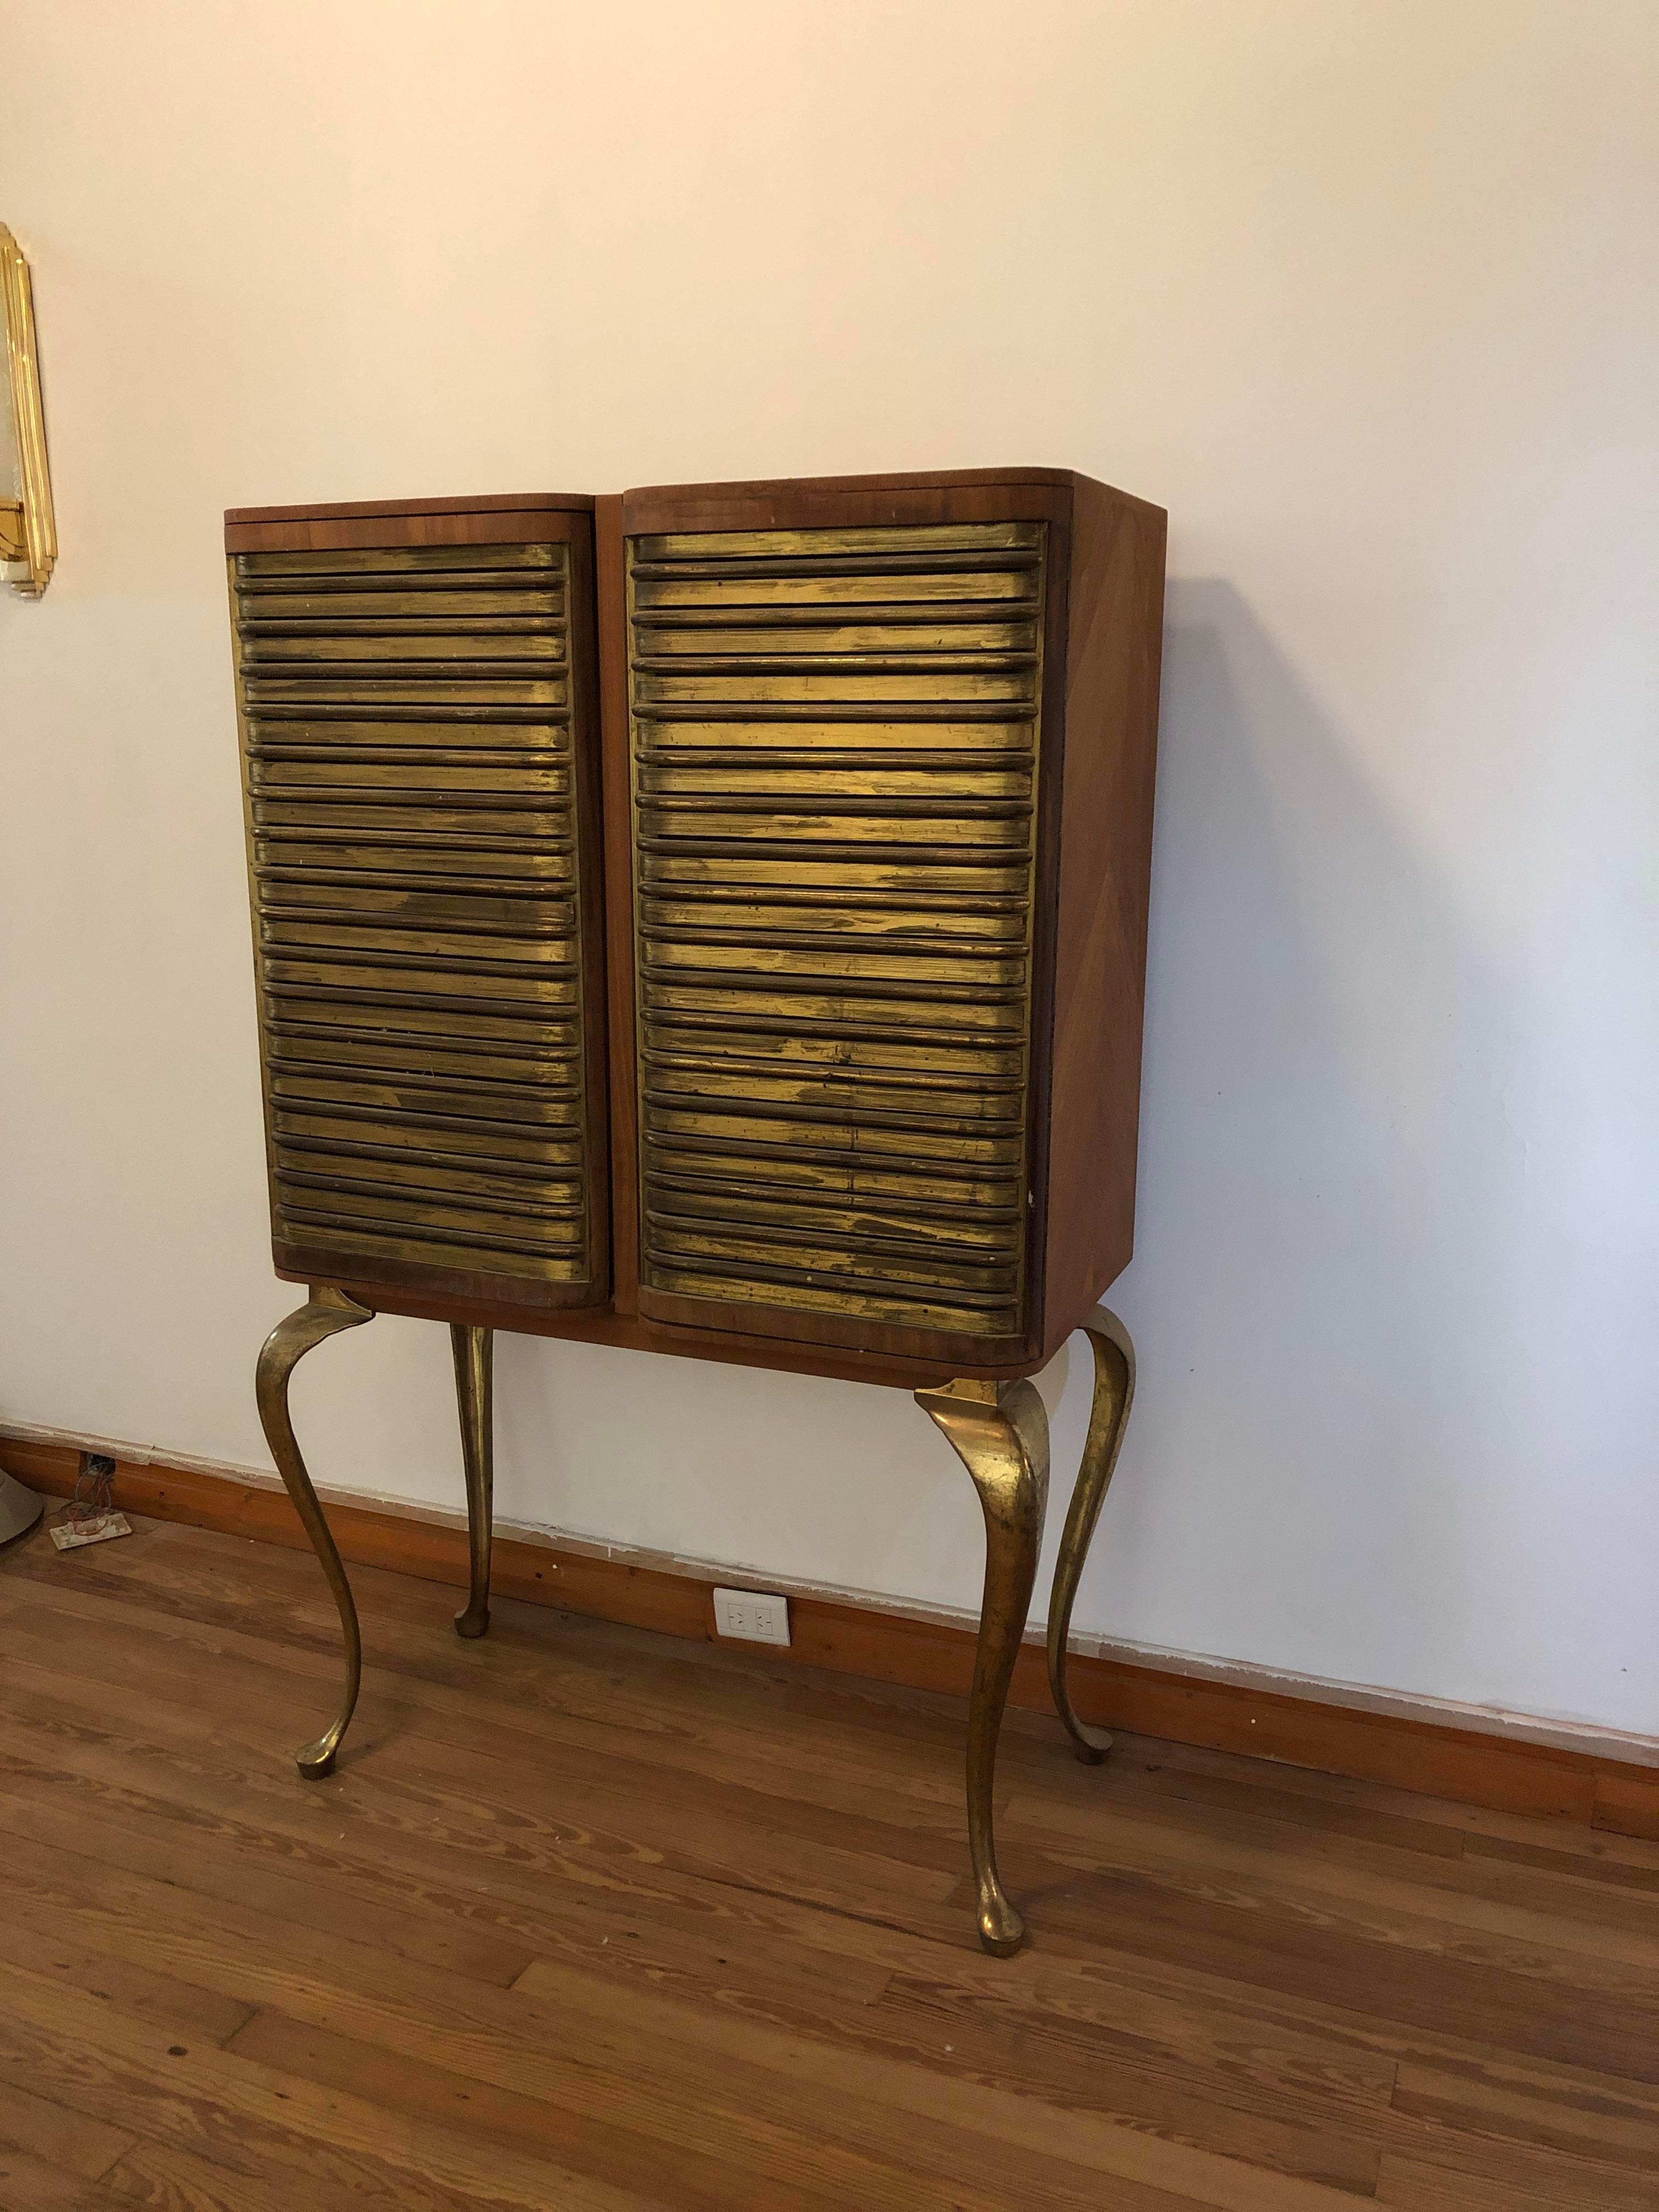 Mid-20th Century Amaizing Bar in Bronze and Wood, Style: Art Deco, Italian For Sale